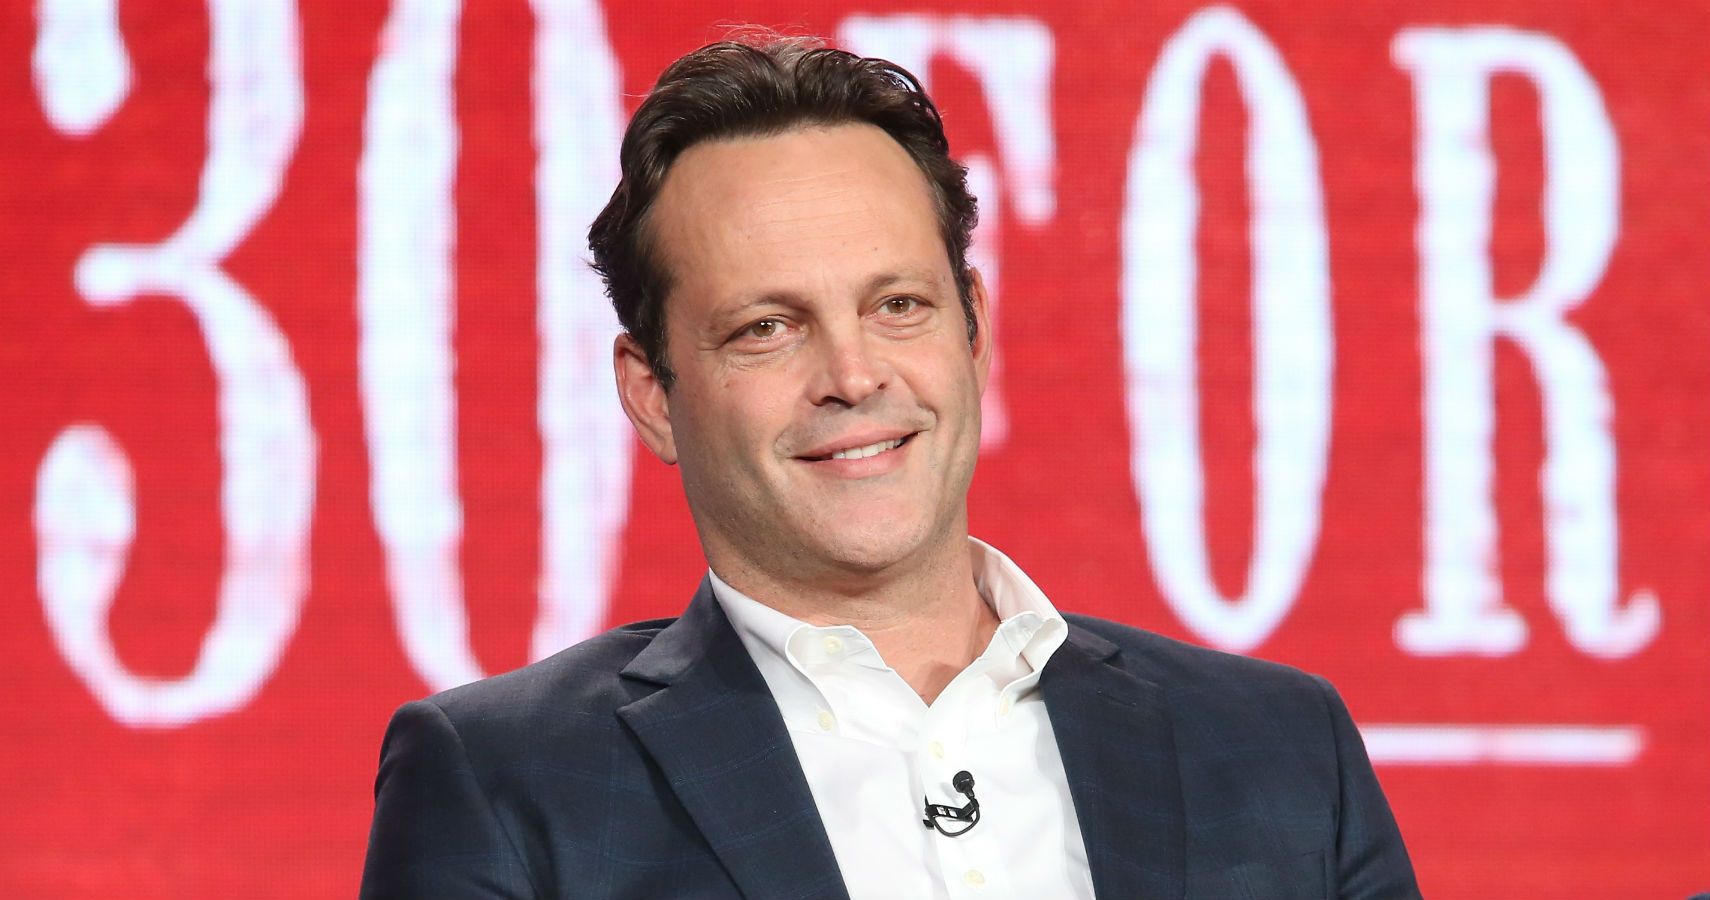 What Happened To Vince Vaughn's Acting Career?